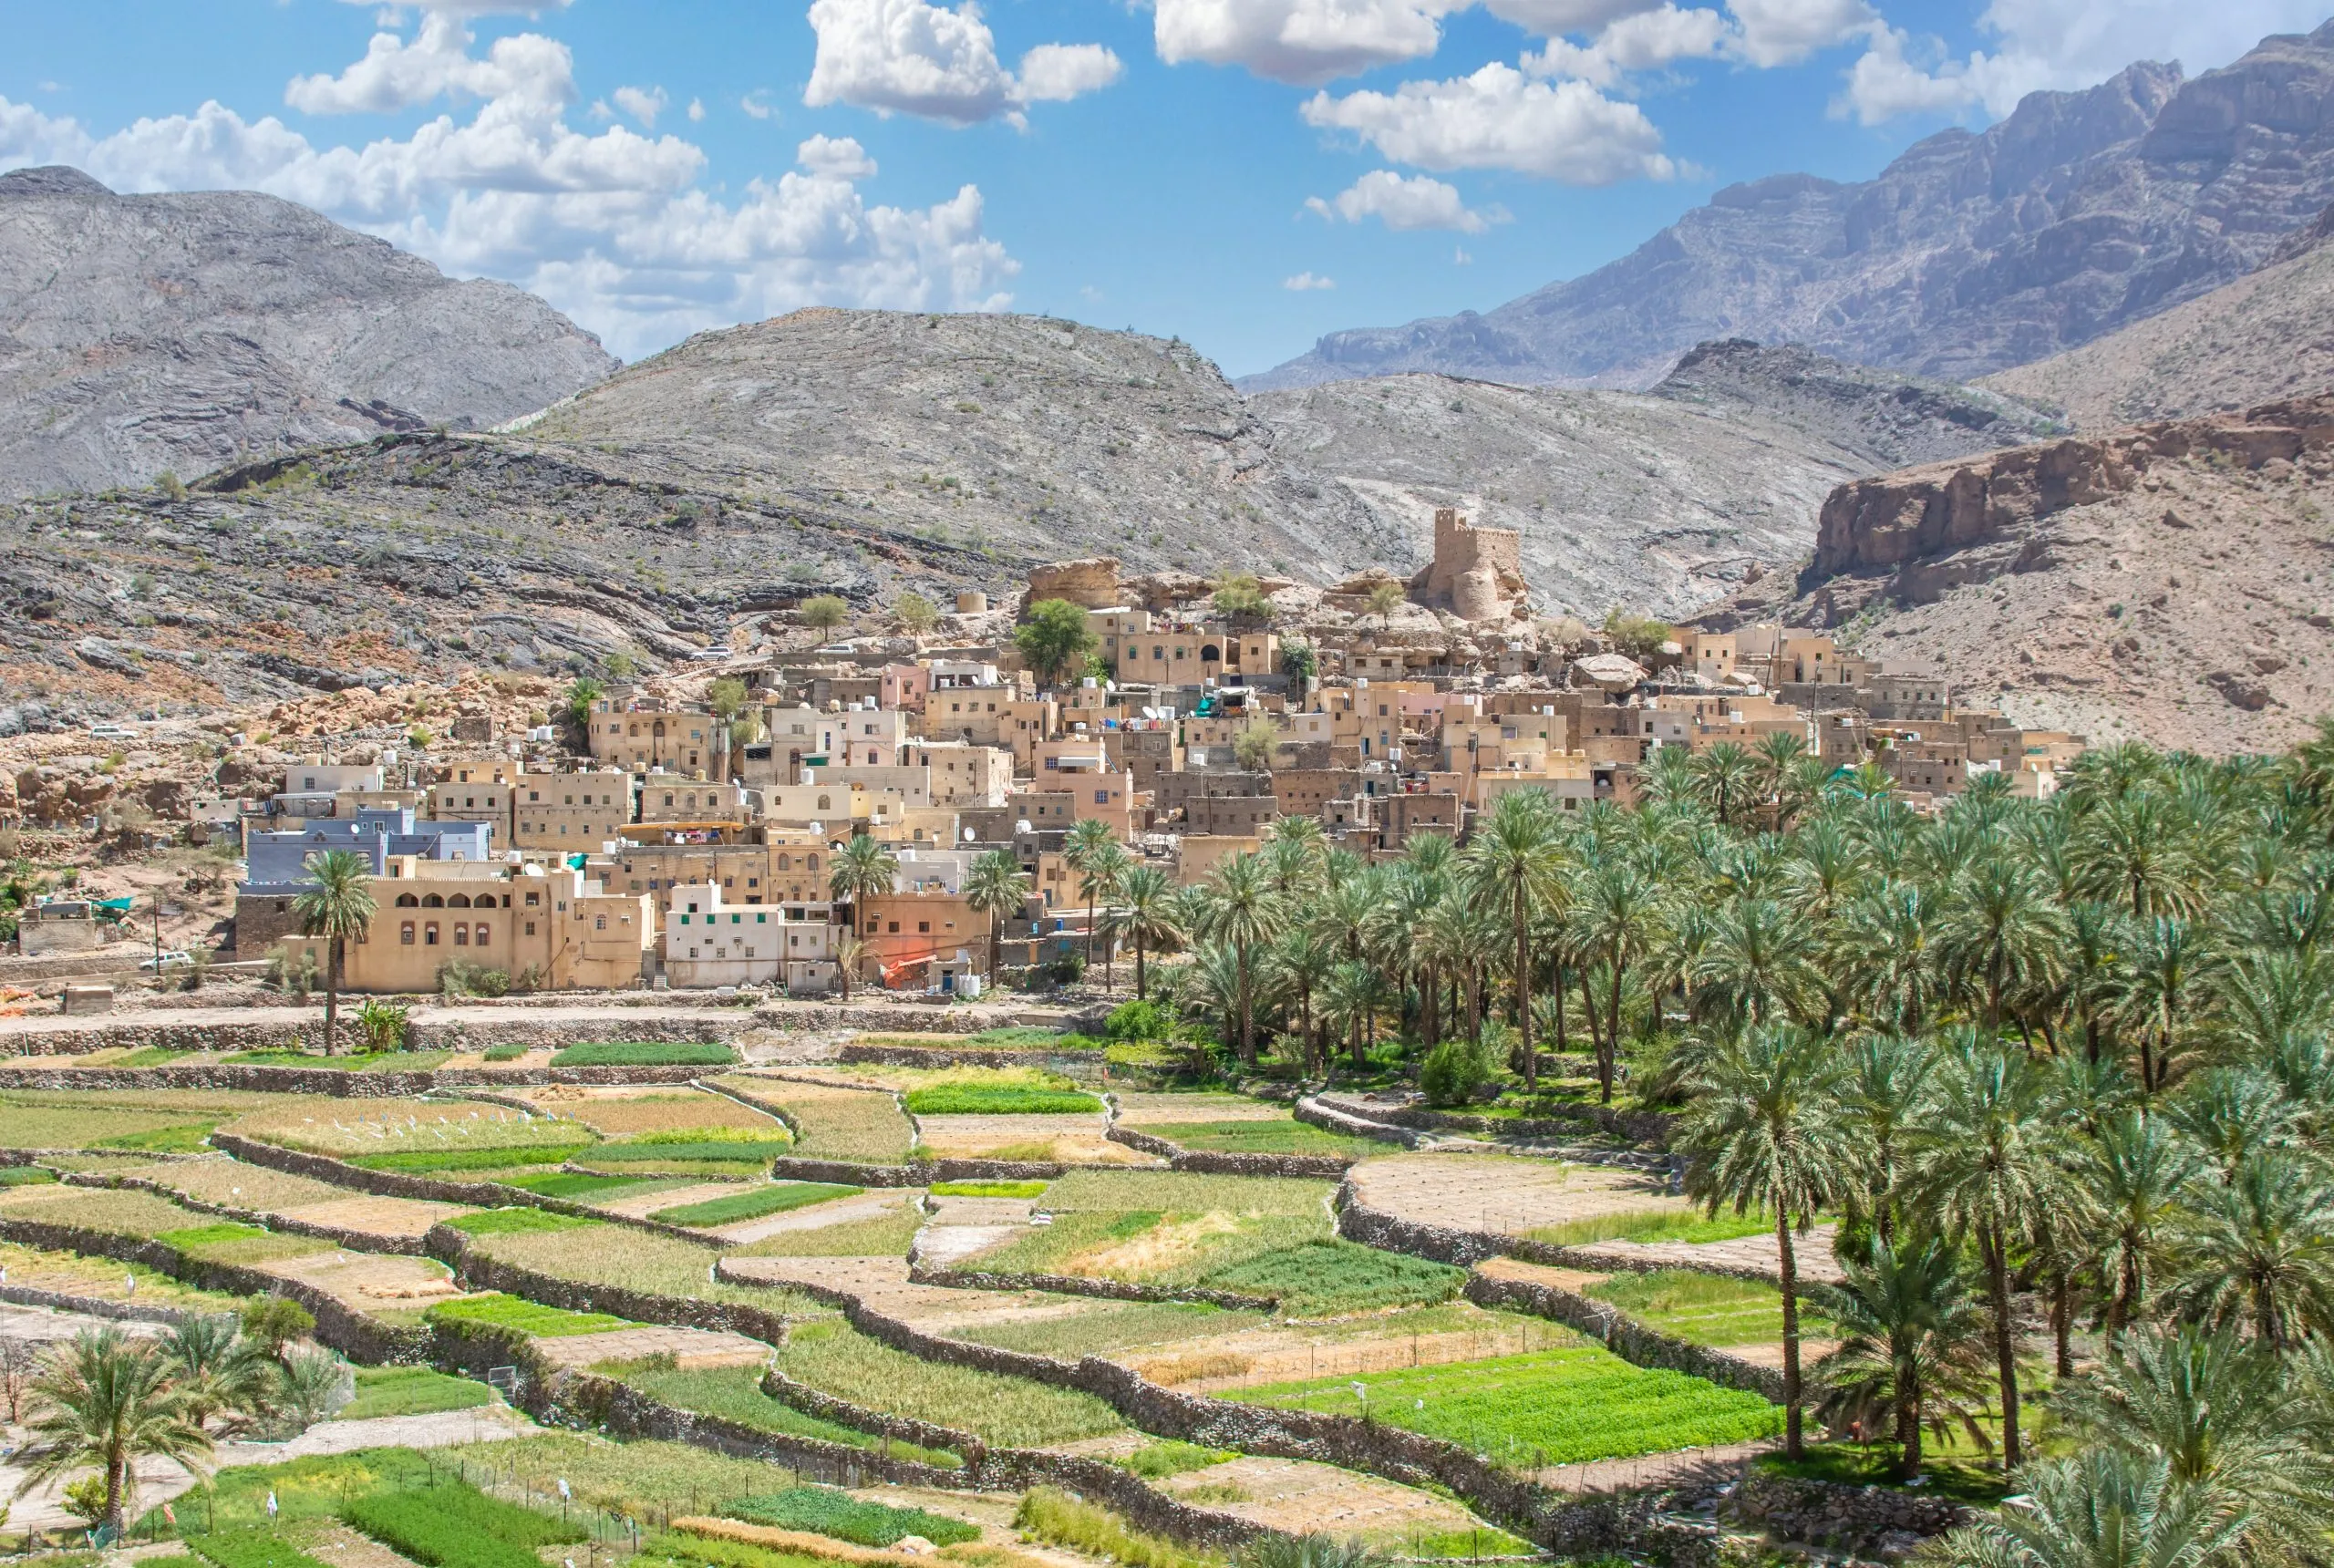 Bilad Sayt, Oman - one of the most picturesque villages in Oman, Bilad Sayt is a treasure which can be found after driving few hours among the spectacular Al Hajar Mountains